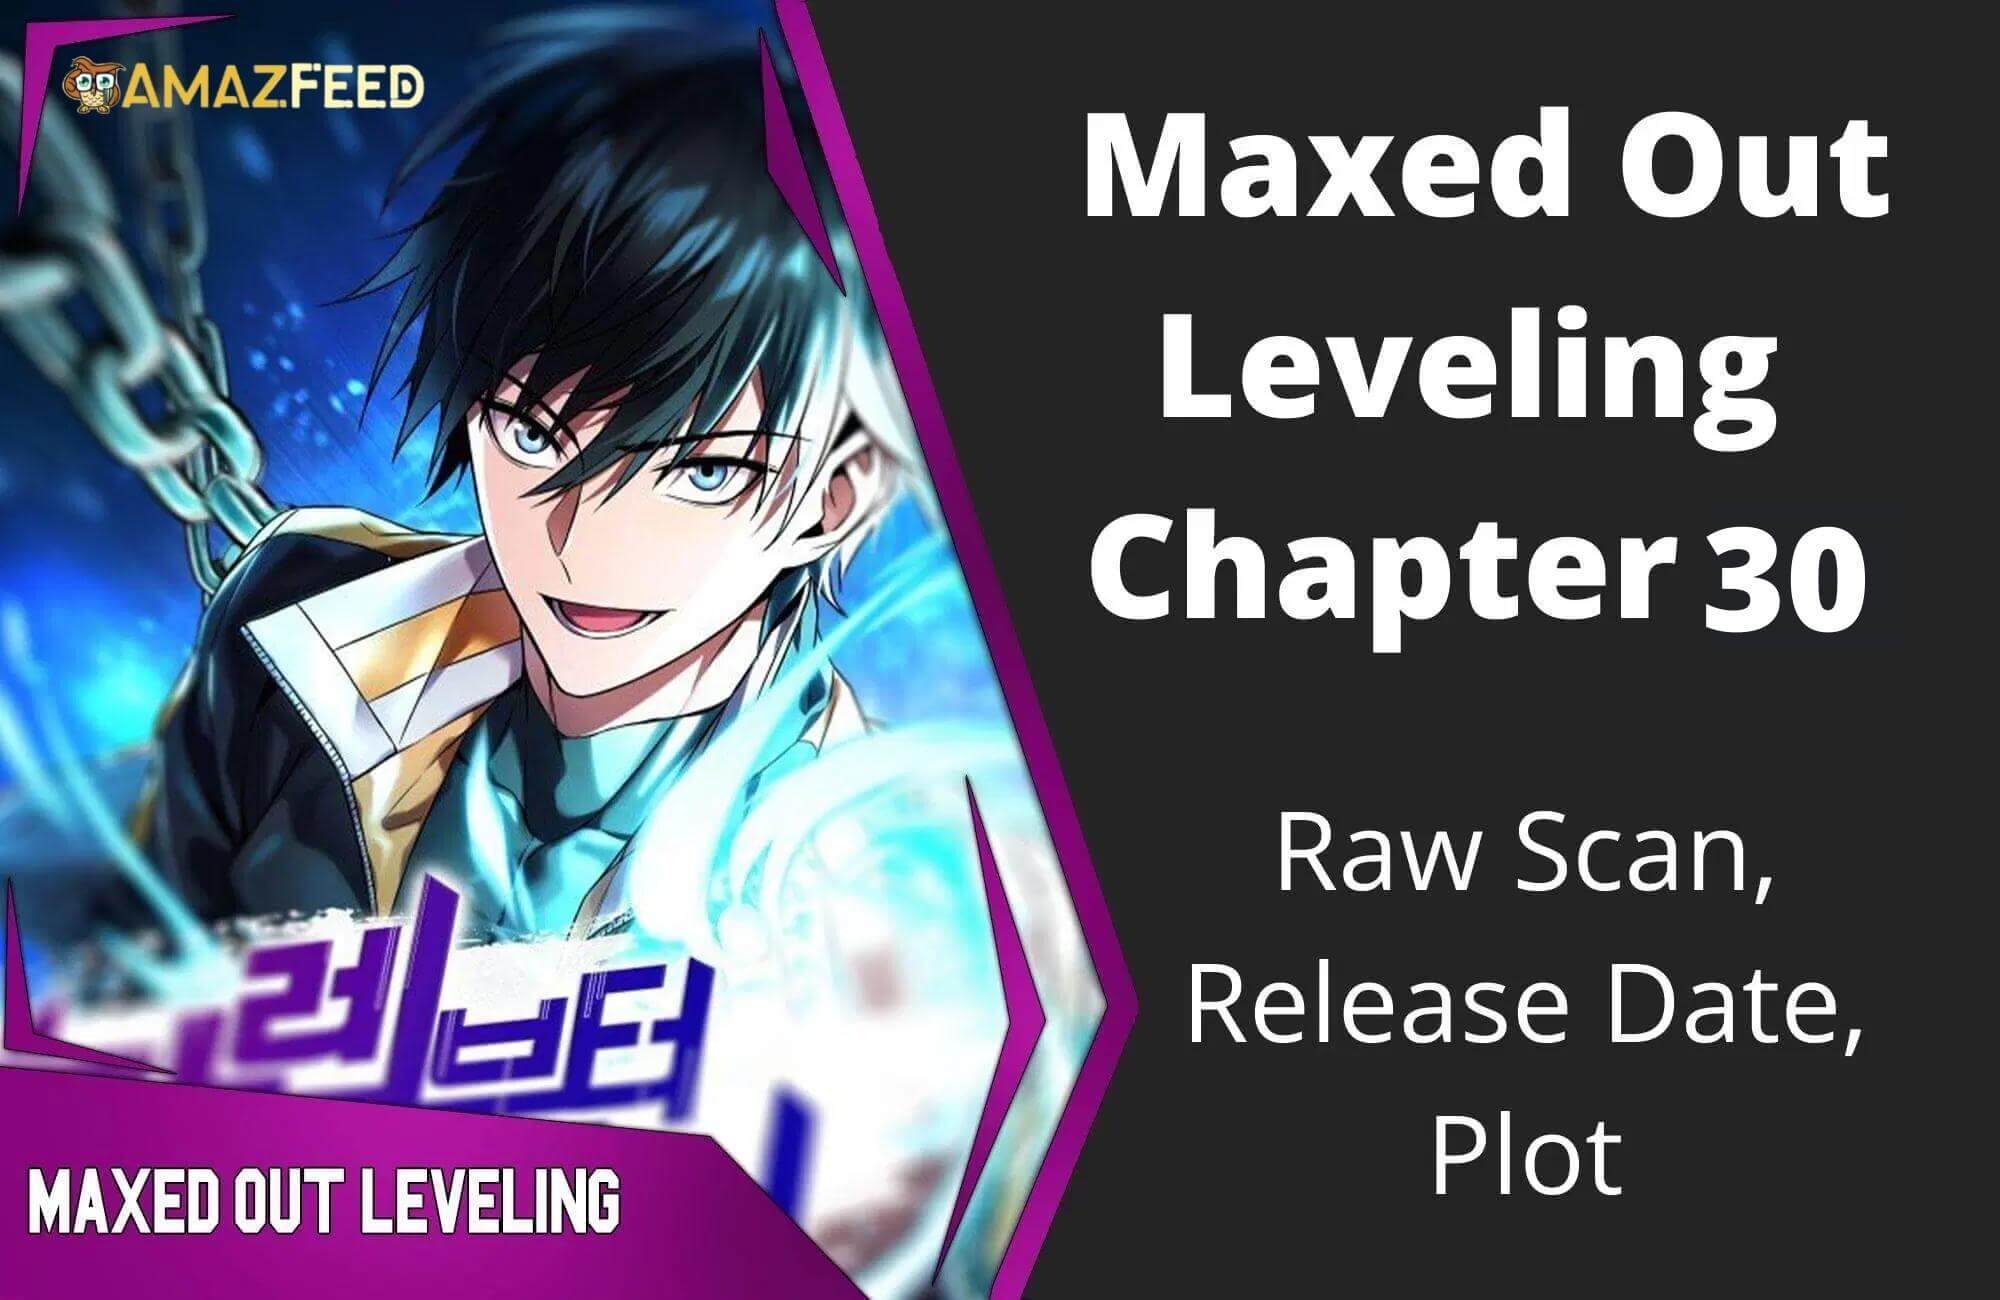 Maxed Out Leveling Chapter 30 Spoiler, Raw Scan, Plot, Color Page, Release Date